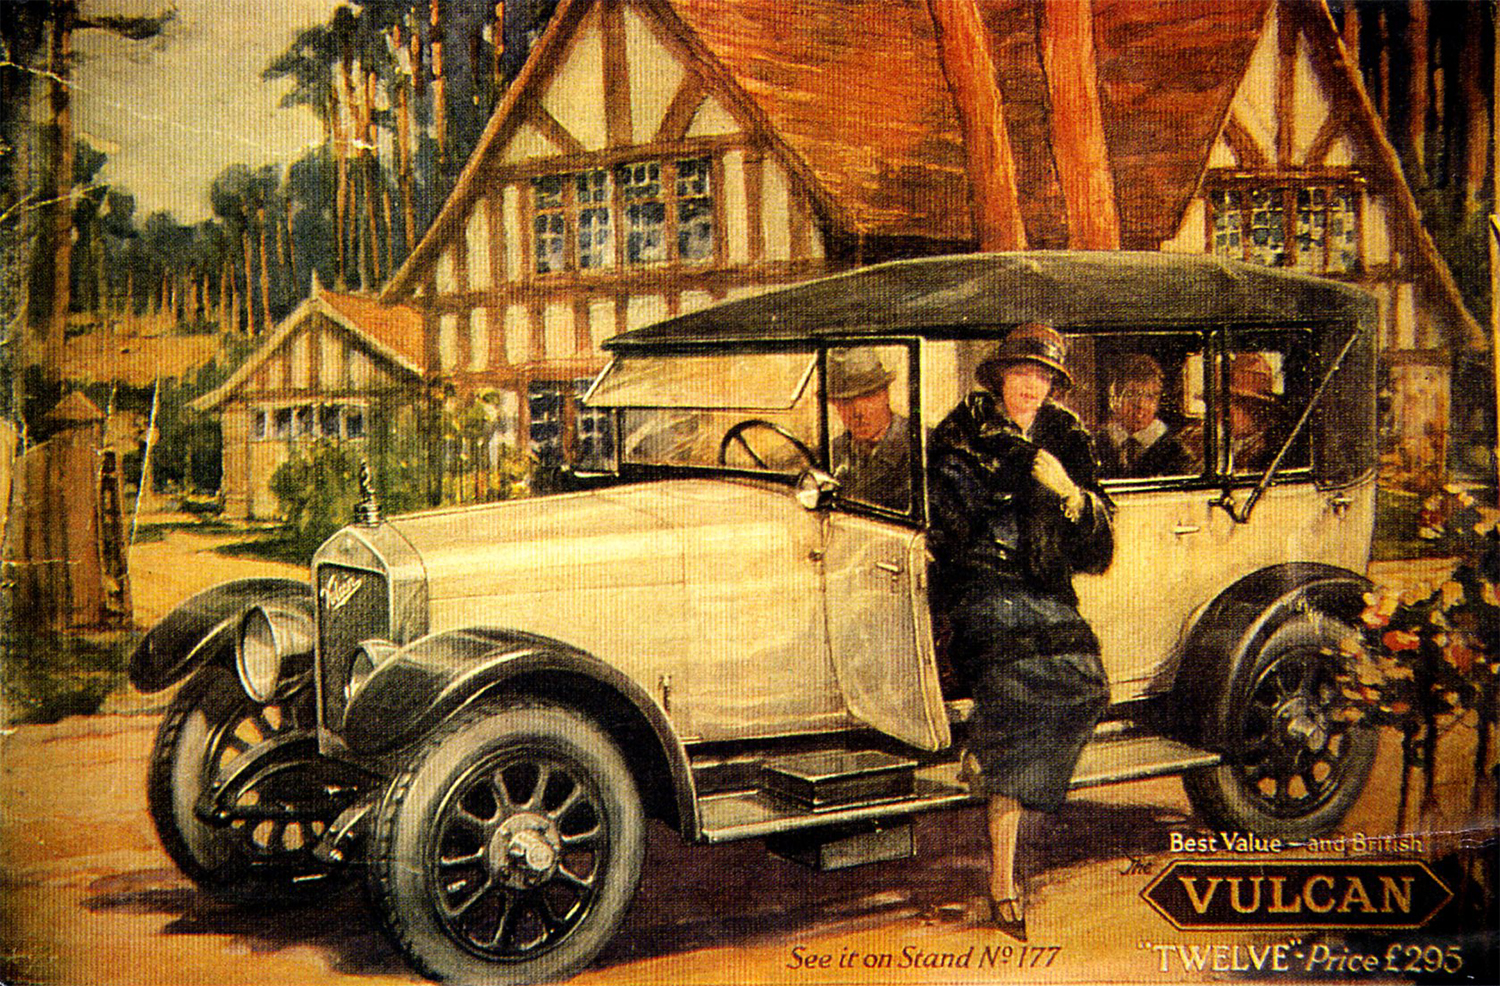 An advert for an old Southport-built Vulcan car. Photo courtesy of The Atkinson in Southport